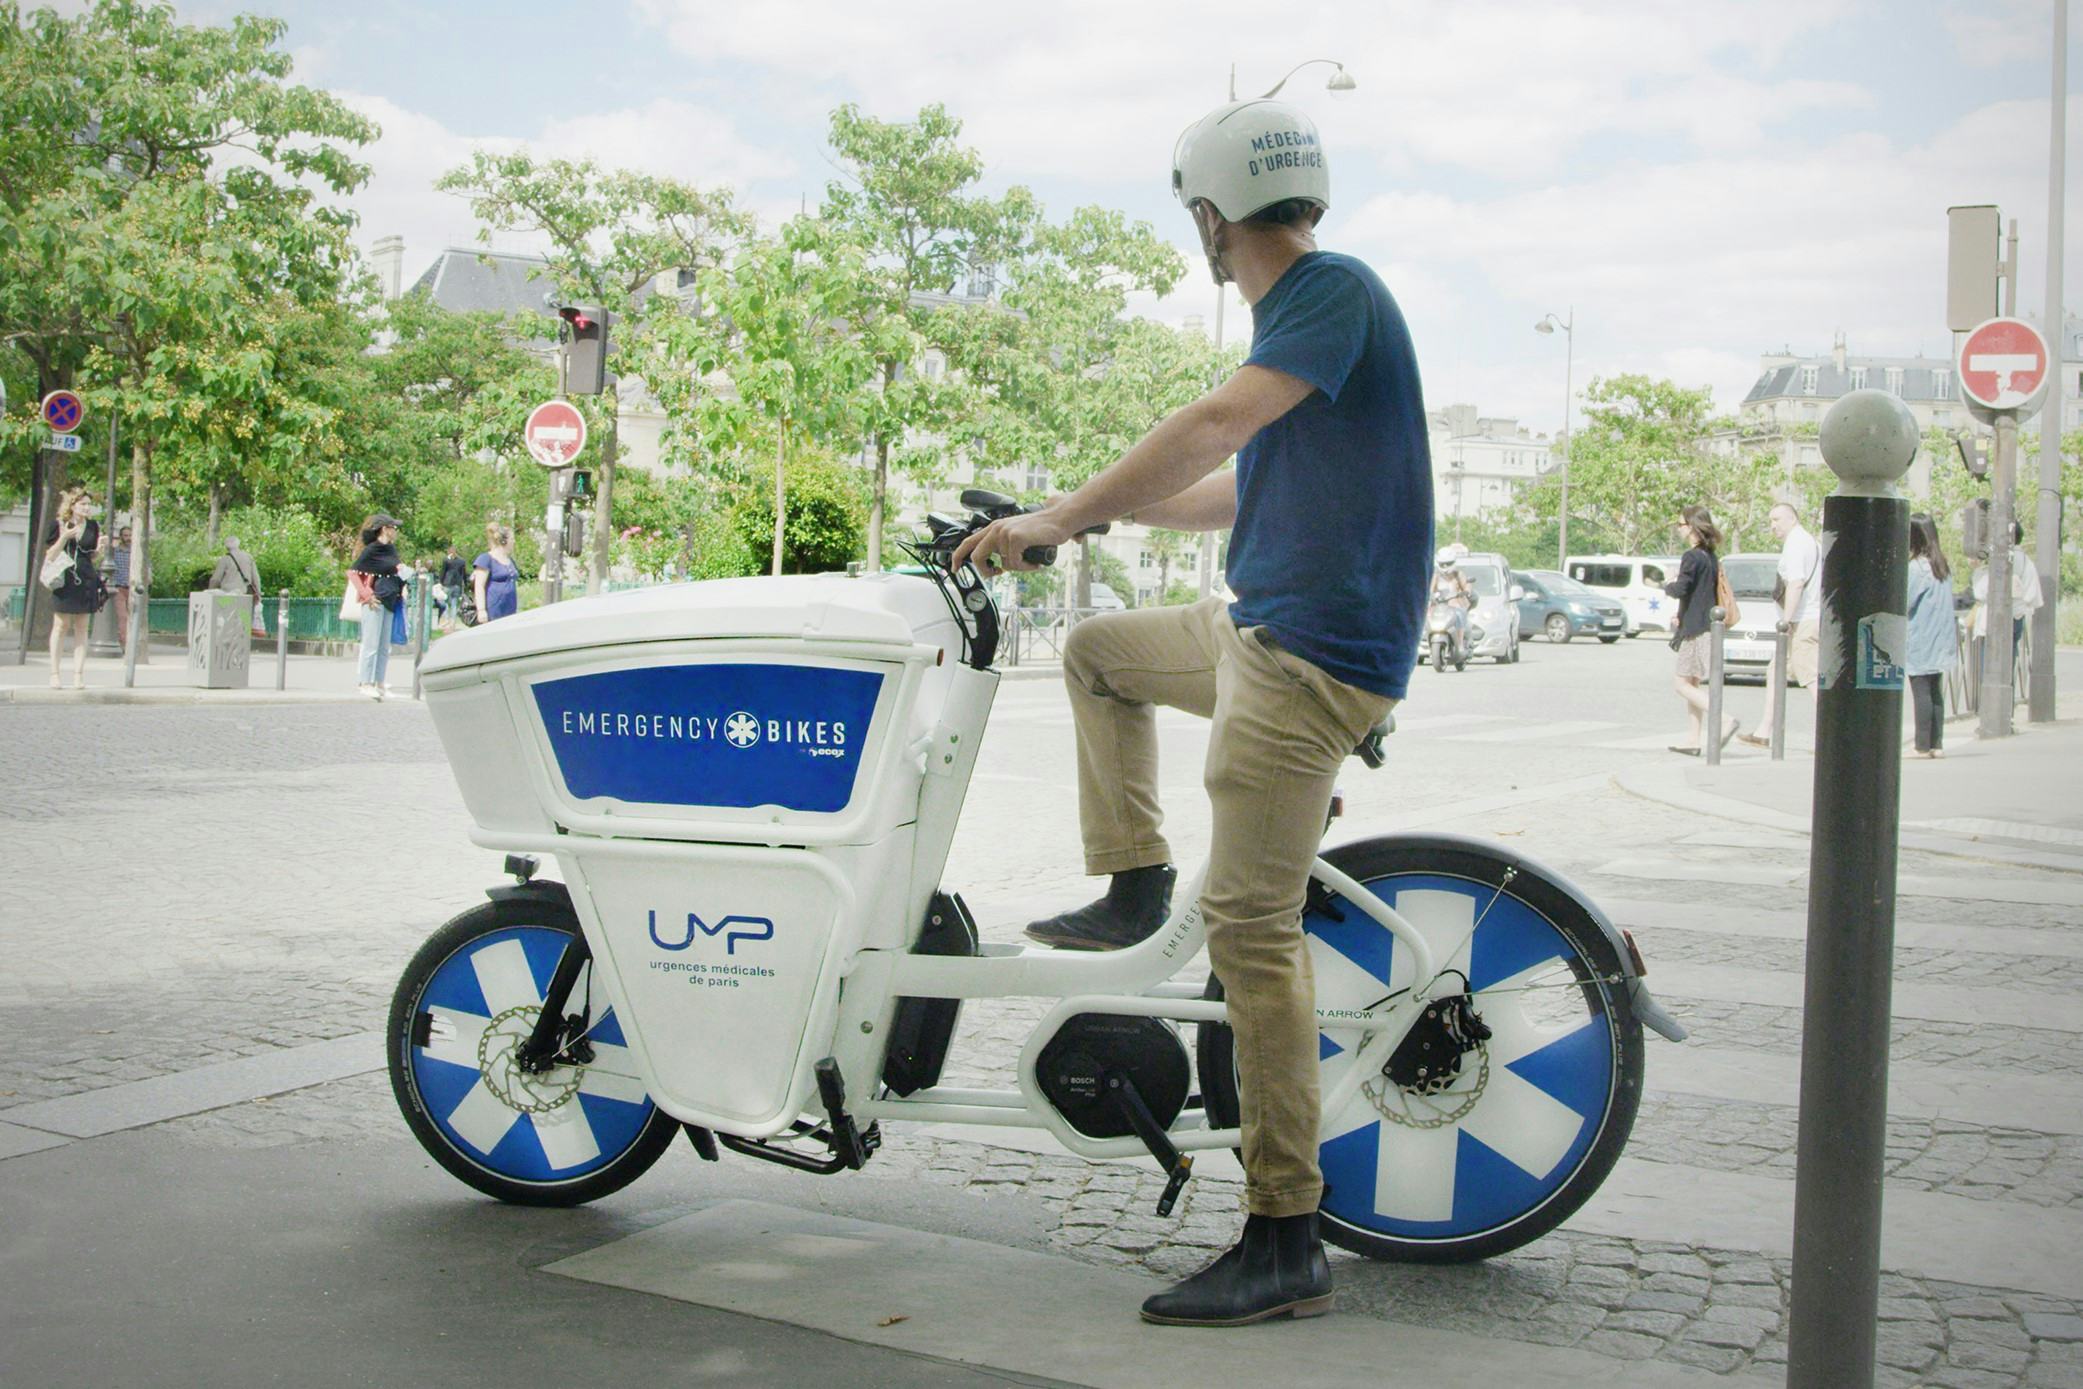 Developers of the Emergency Bikes which made their debut in Paris, hope the concept will spread to other cities and countries. - Photo Wunderman Thompson Paris  